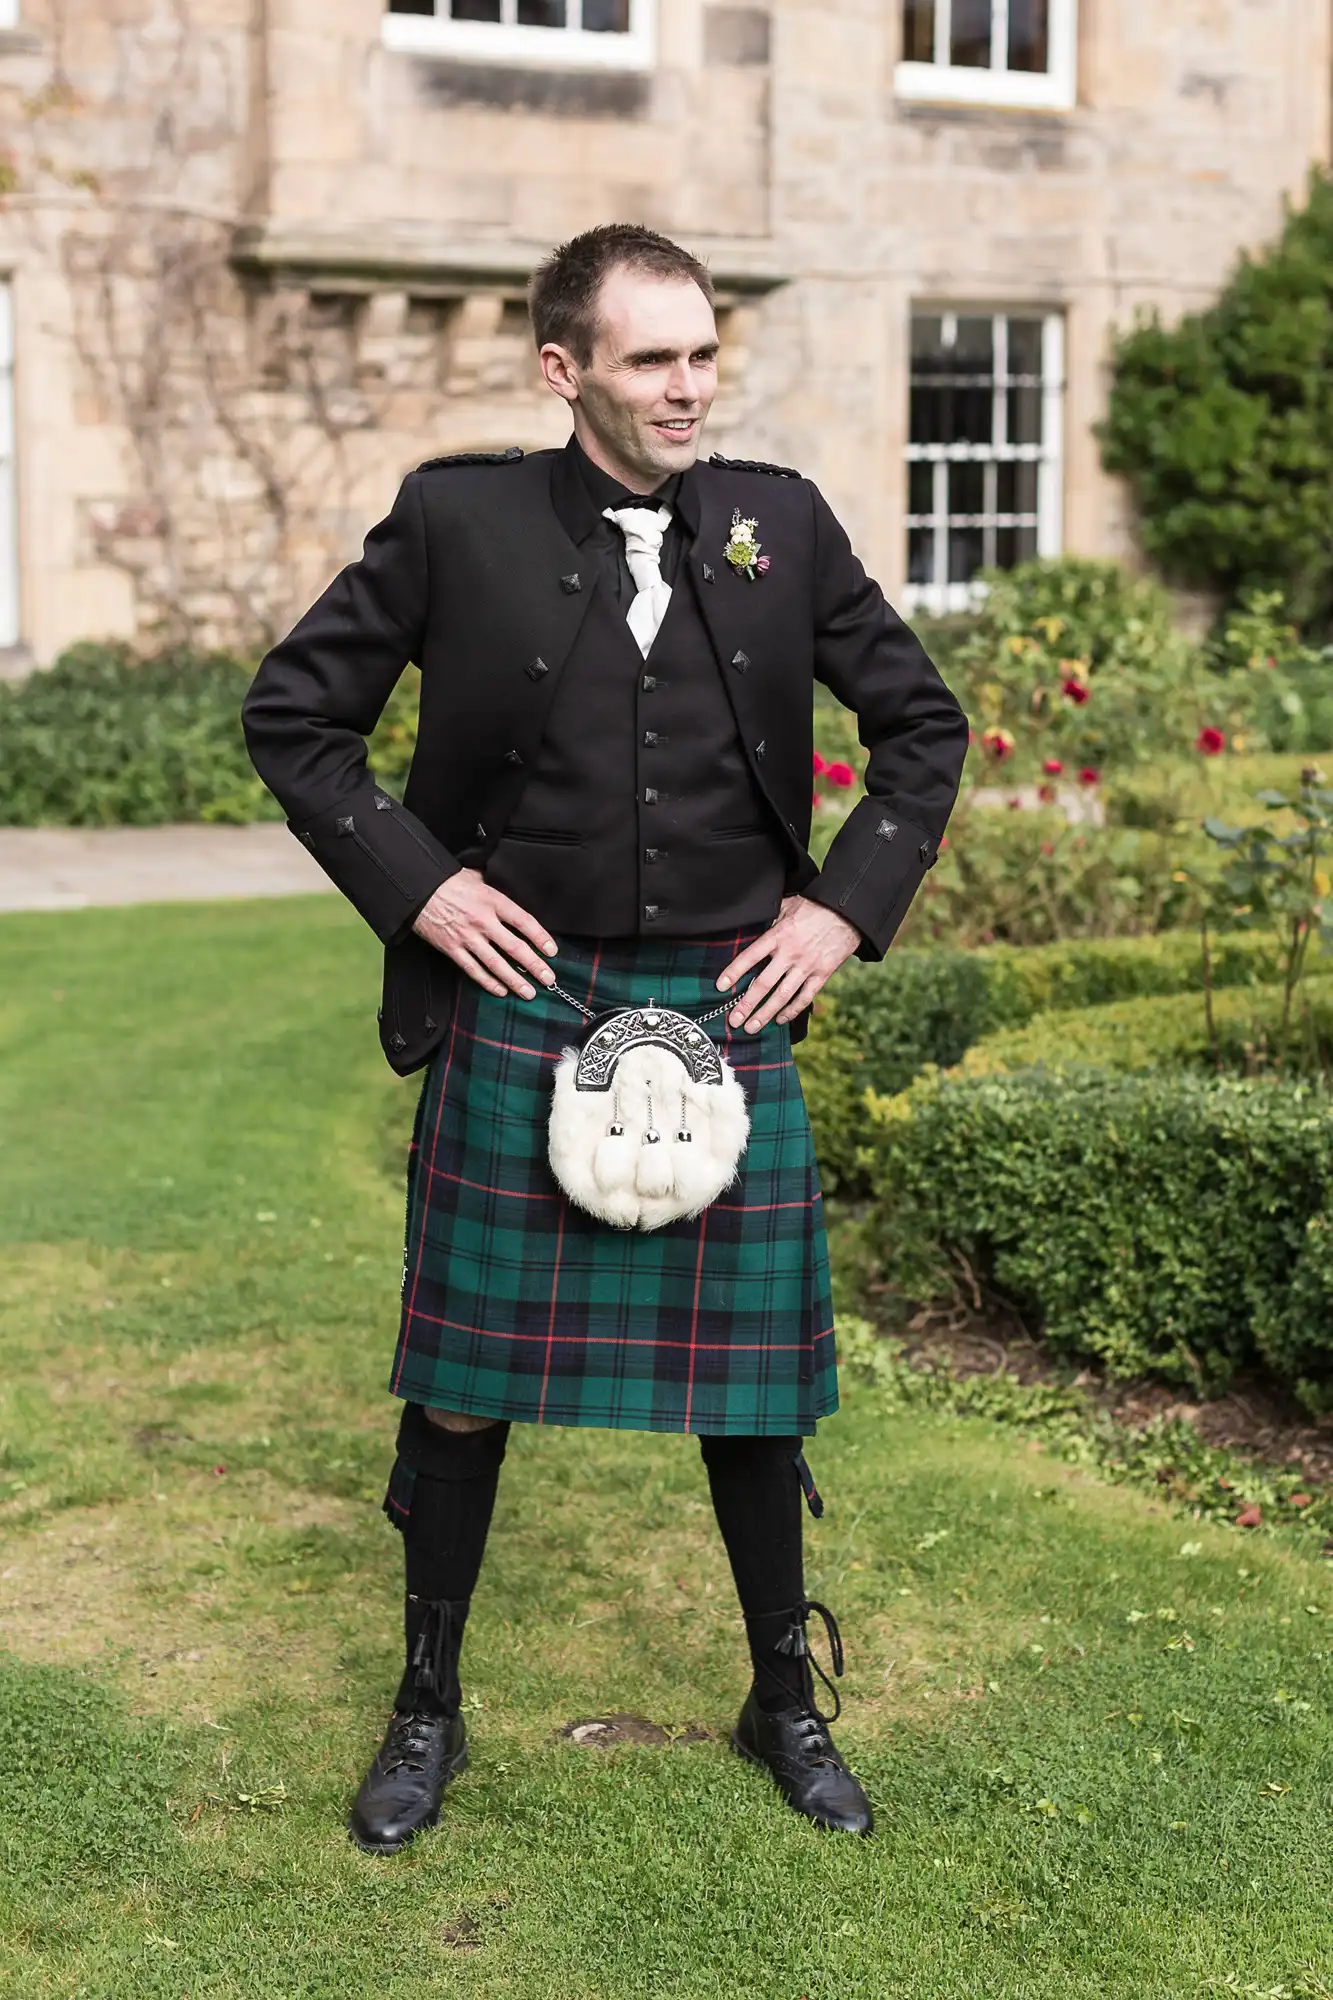 Man in traditional scottish attire, including kilt and sporran, standing outdoors with a castle-like building and gardens in the background.